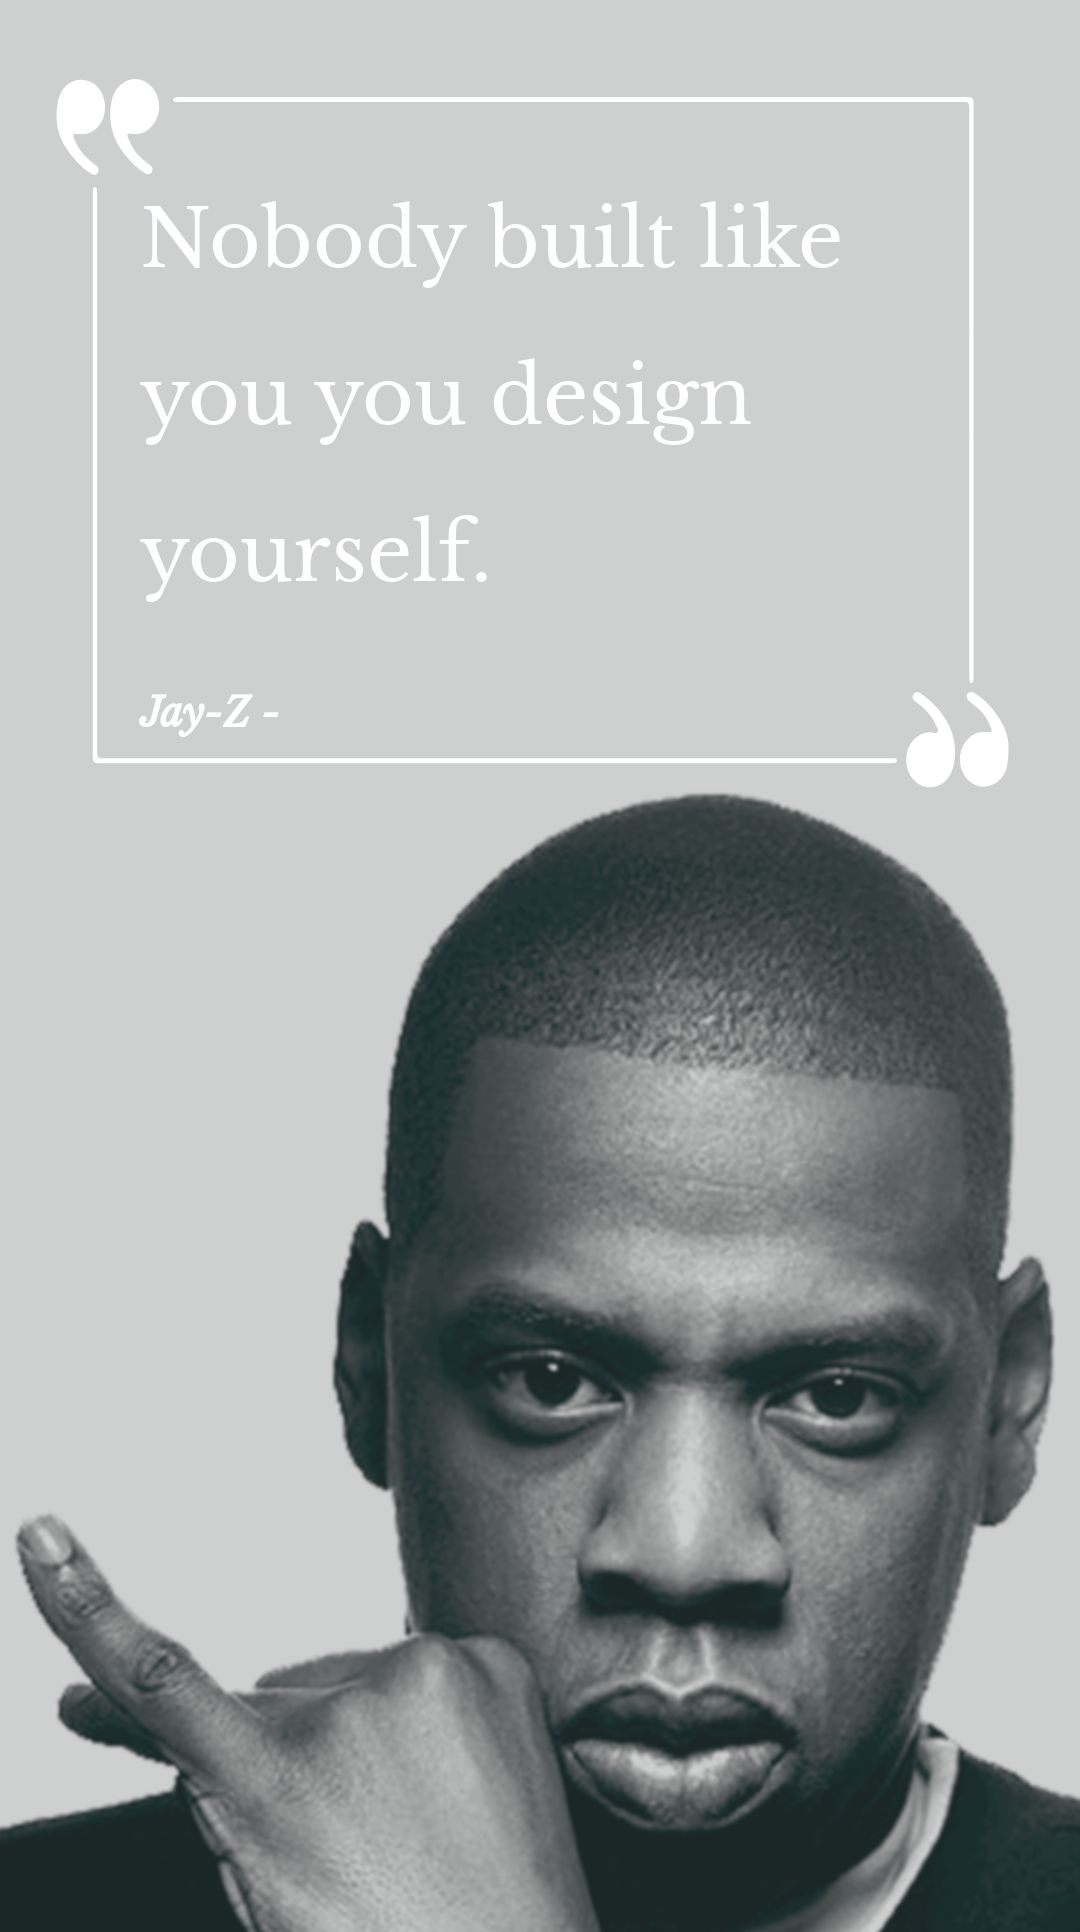 Jay-Z - Nobody built like you you design yourself.